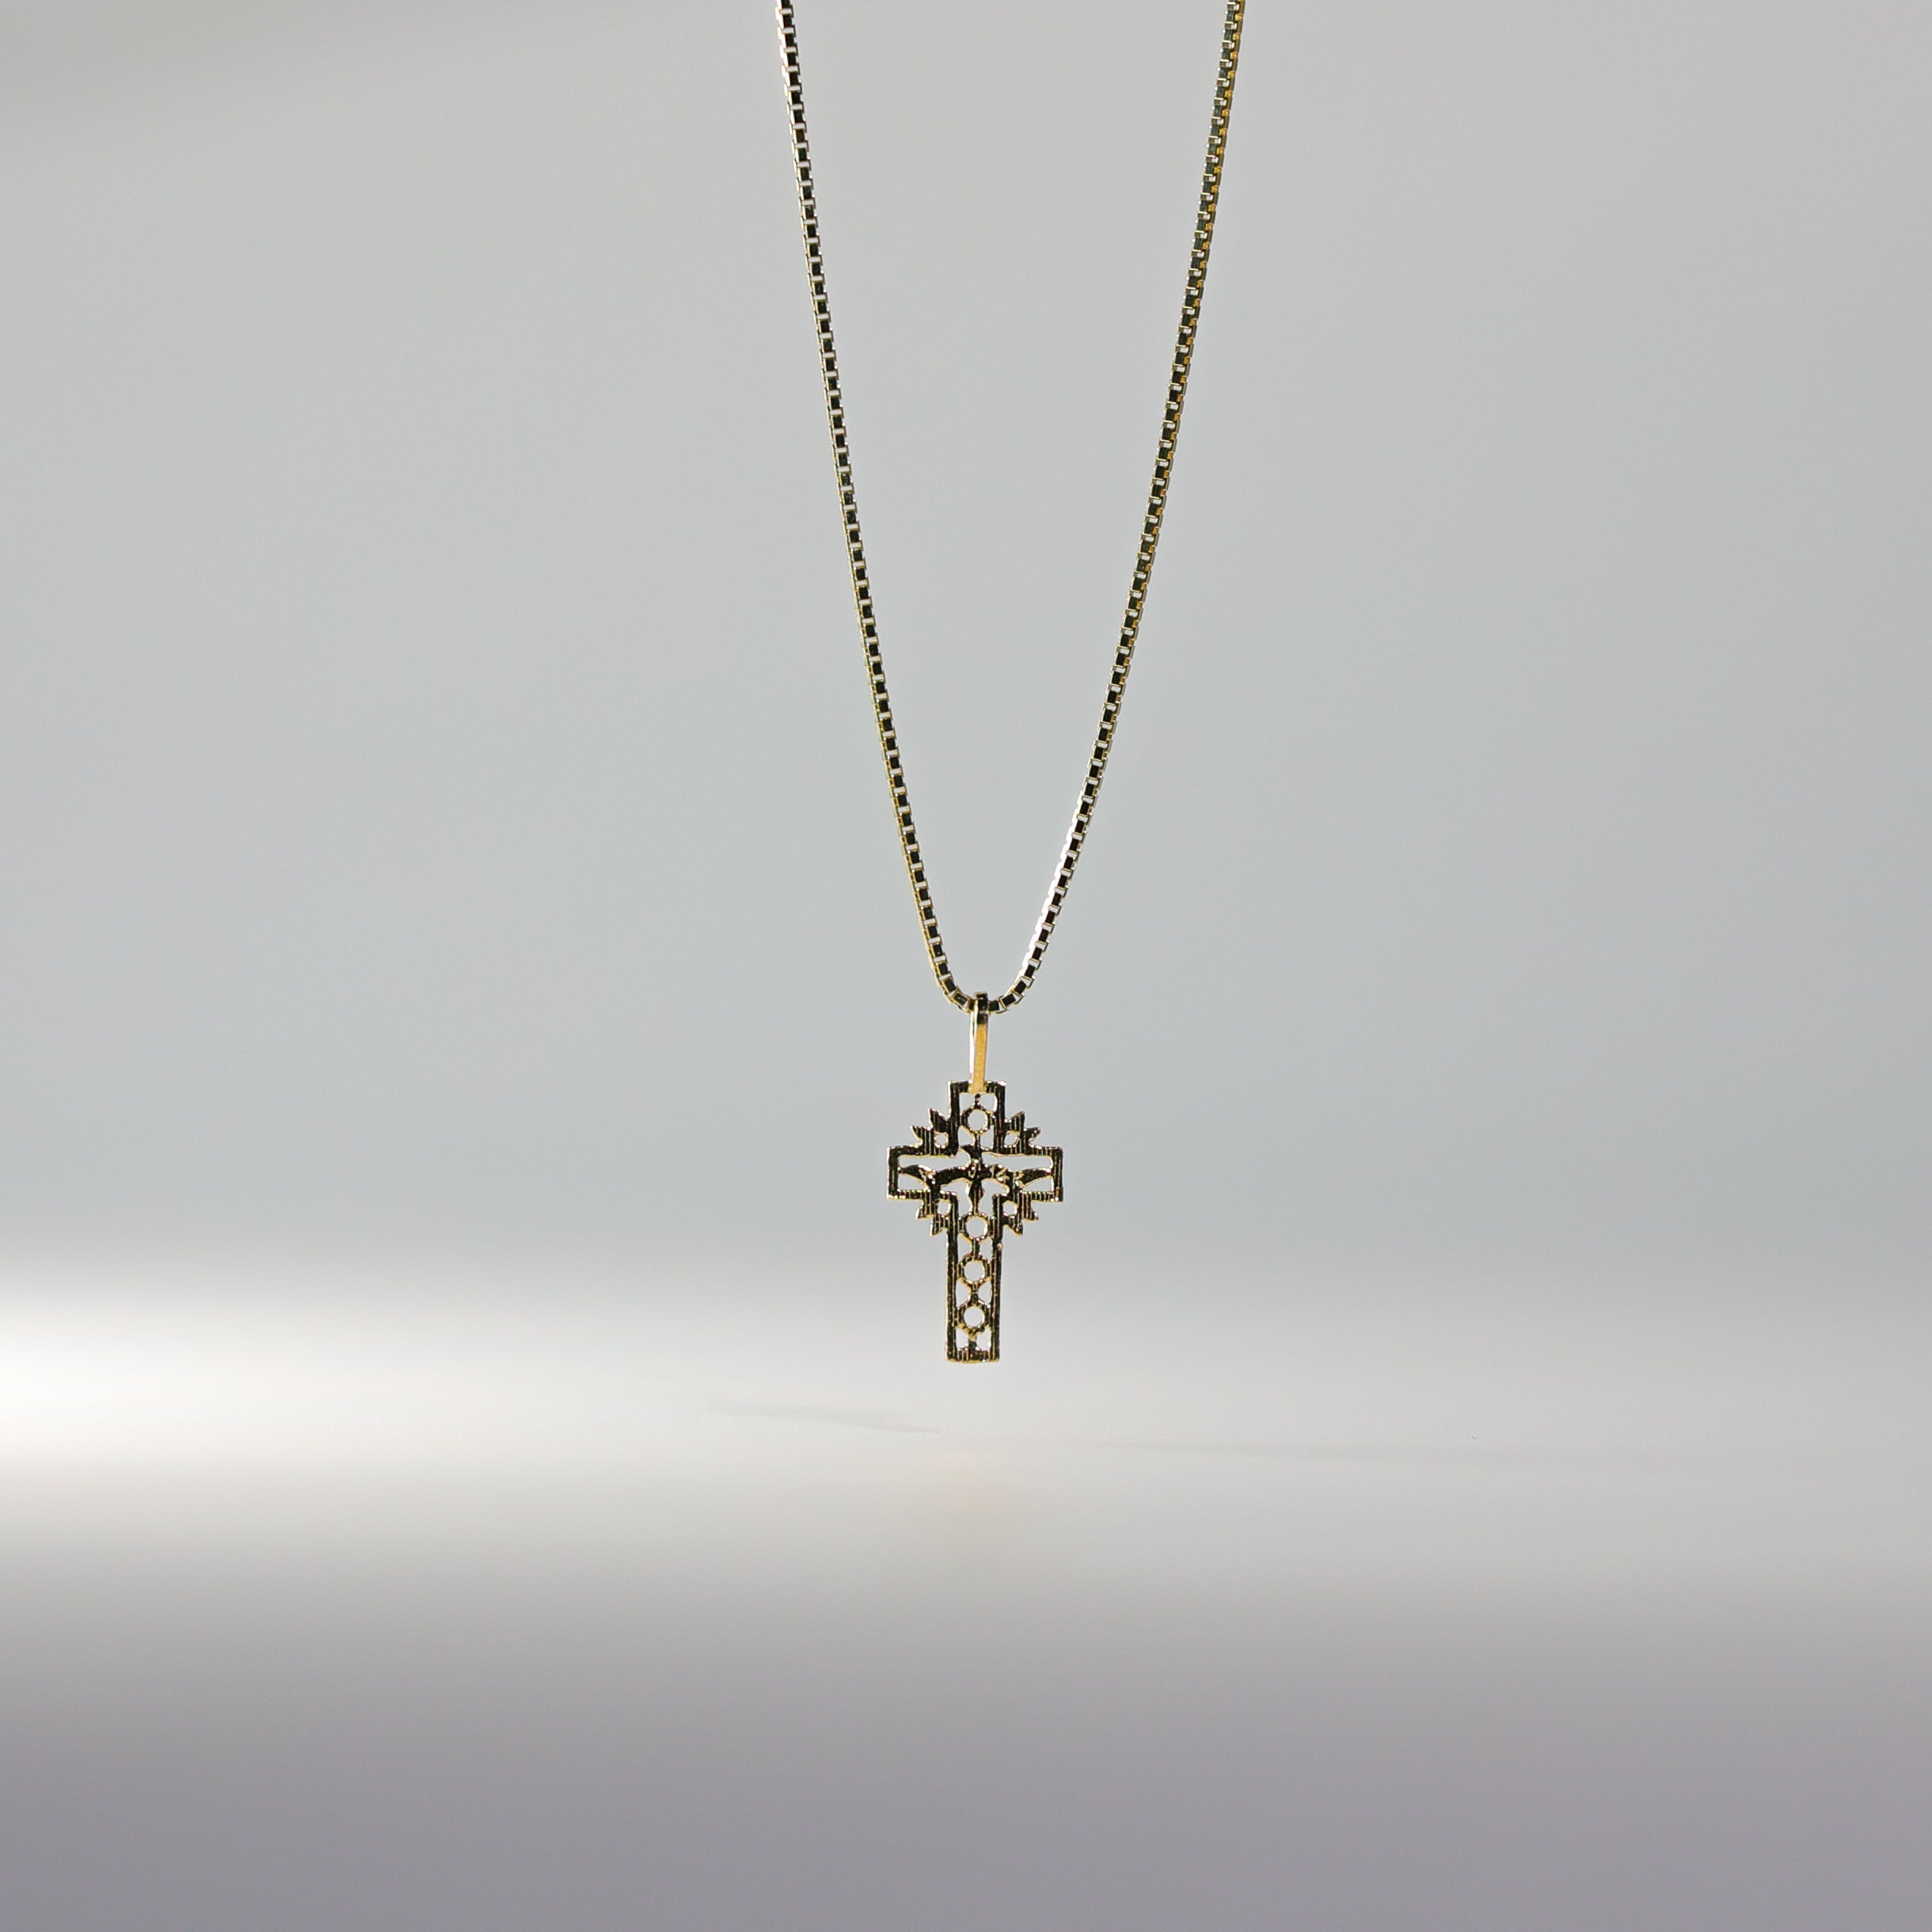 Gold Cross With Holy Spirit Dove Pendant Model-1463 - Charlie & Co. Jewelry